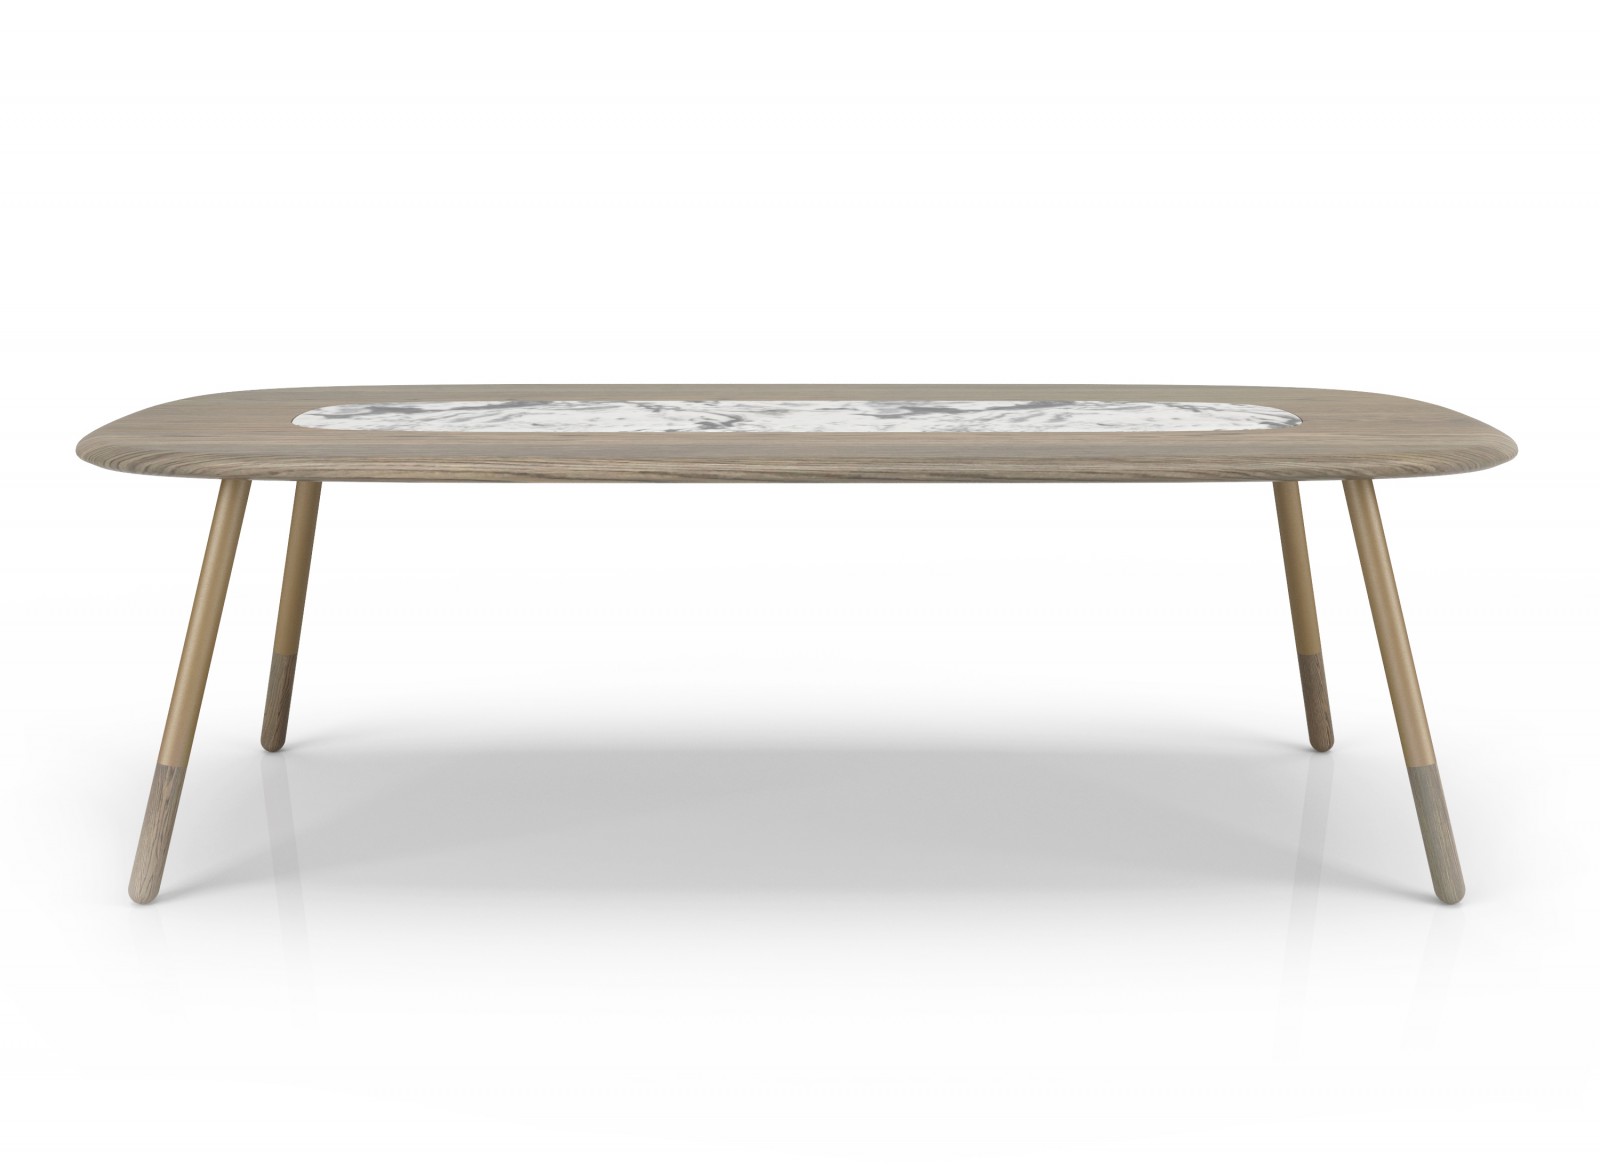 102'' Table with natural stone